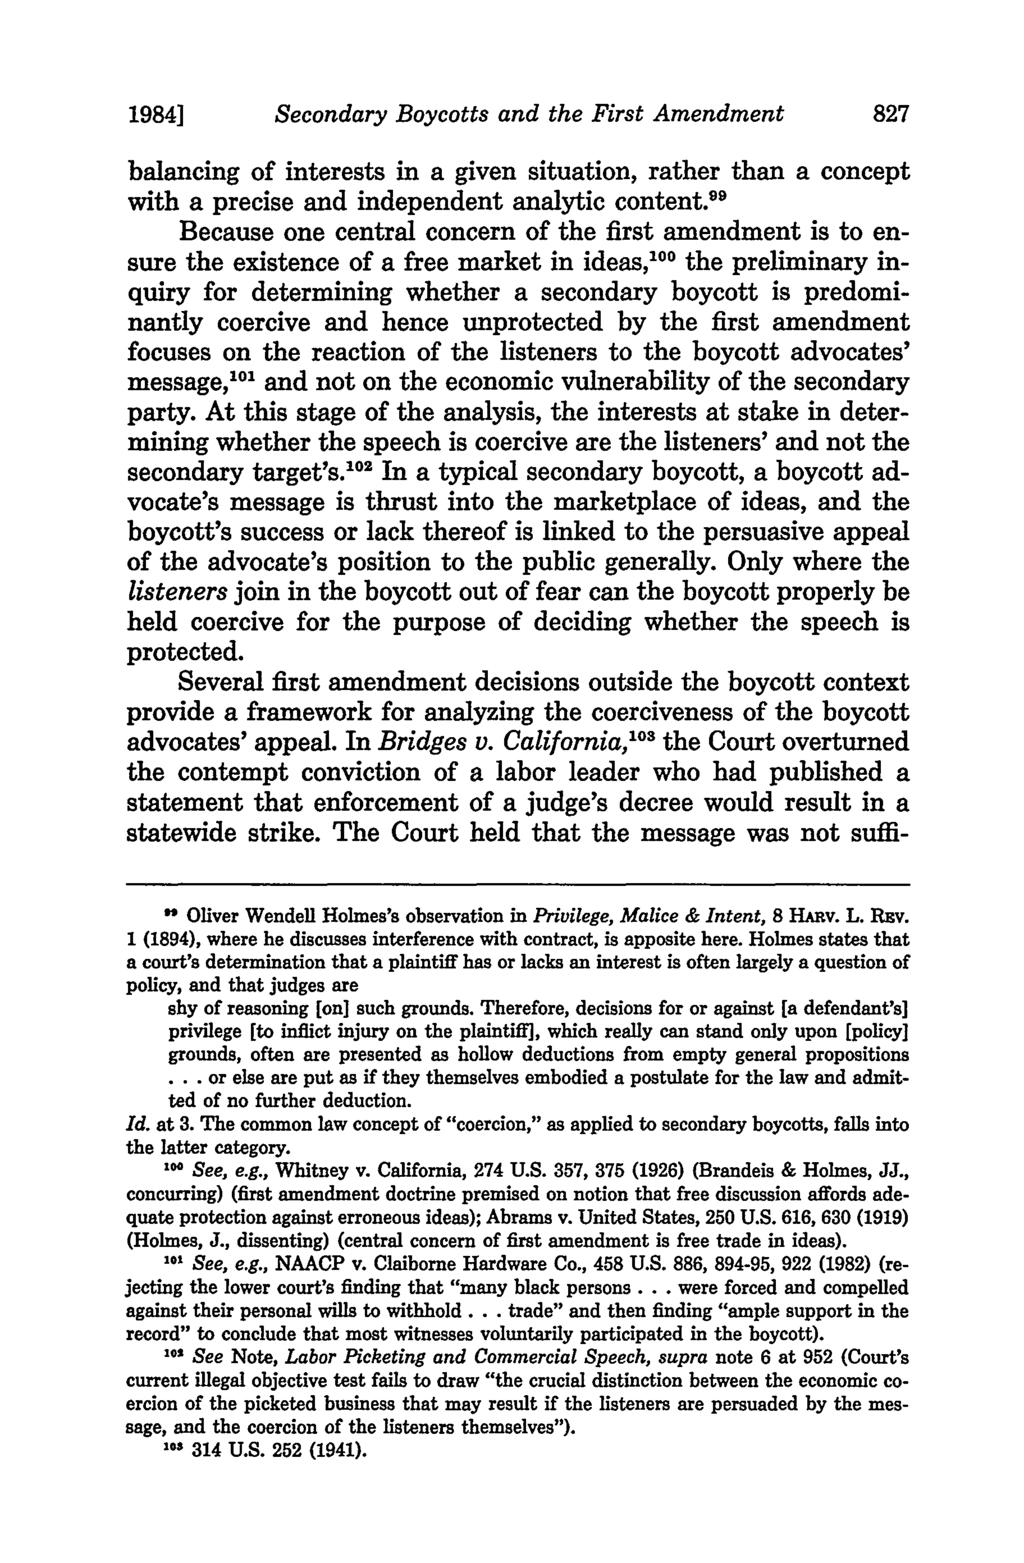 1984] Secondary Boycotts and the First Amendment balancing of interests in a given situation, rather than a concept with a precise and independent analytic content.